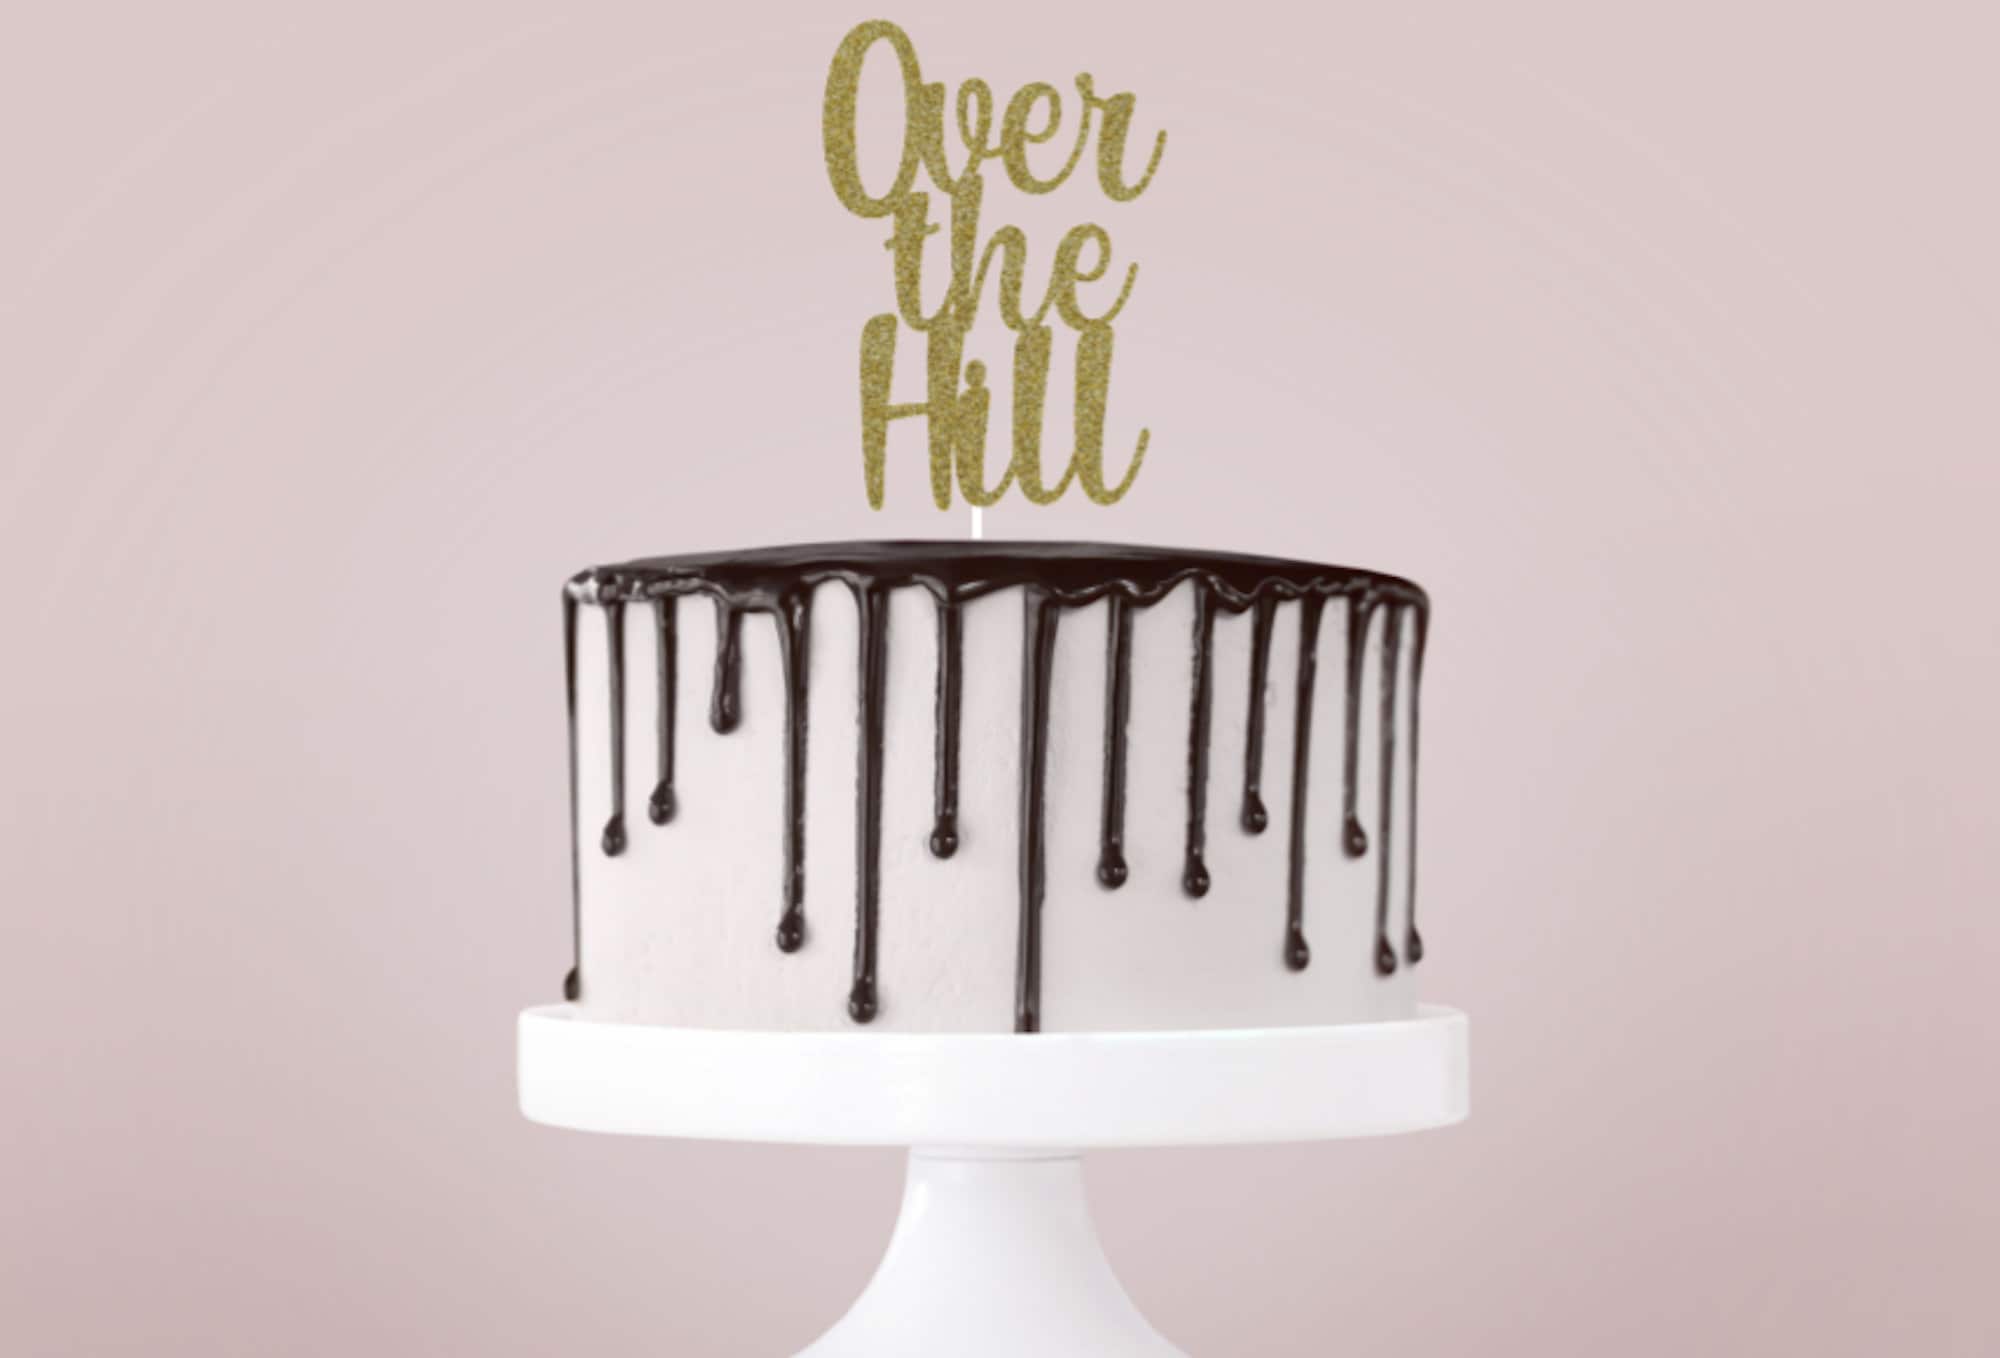 Over the Hill Cake Topper Funny Birthday Cake Topper 40th - Etsy